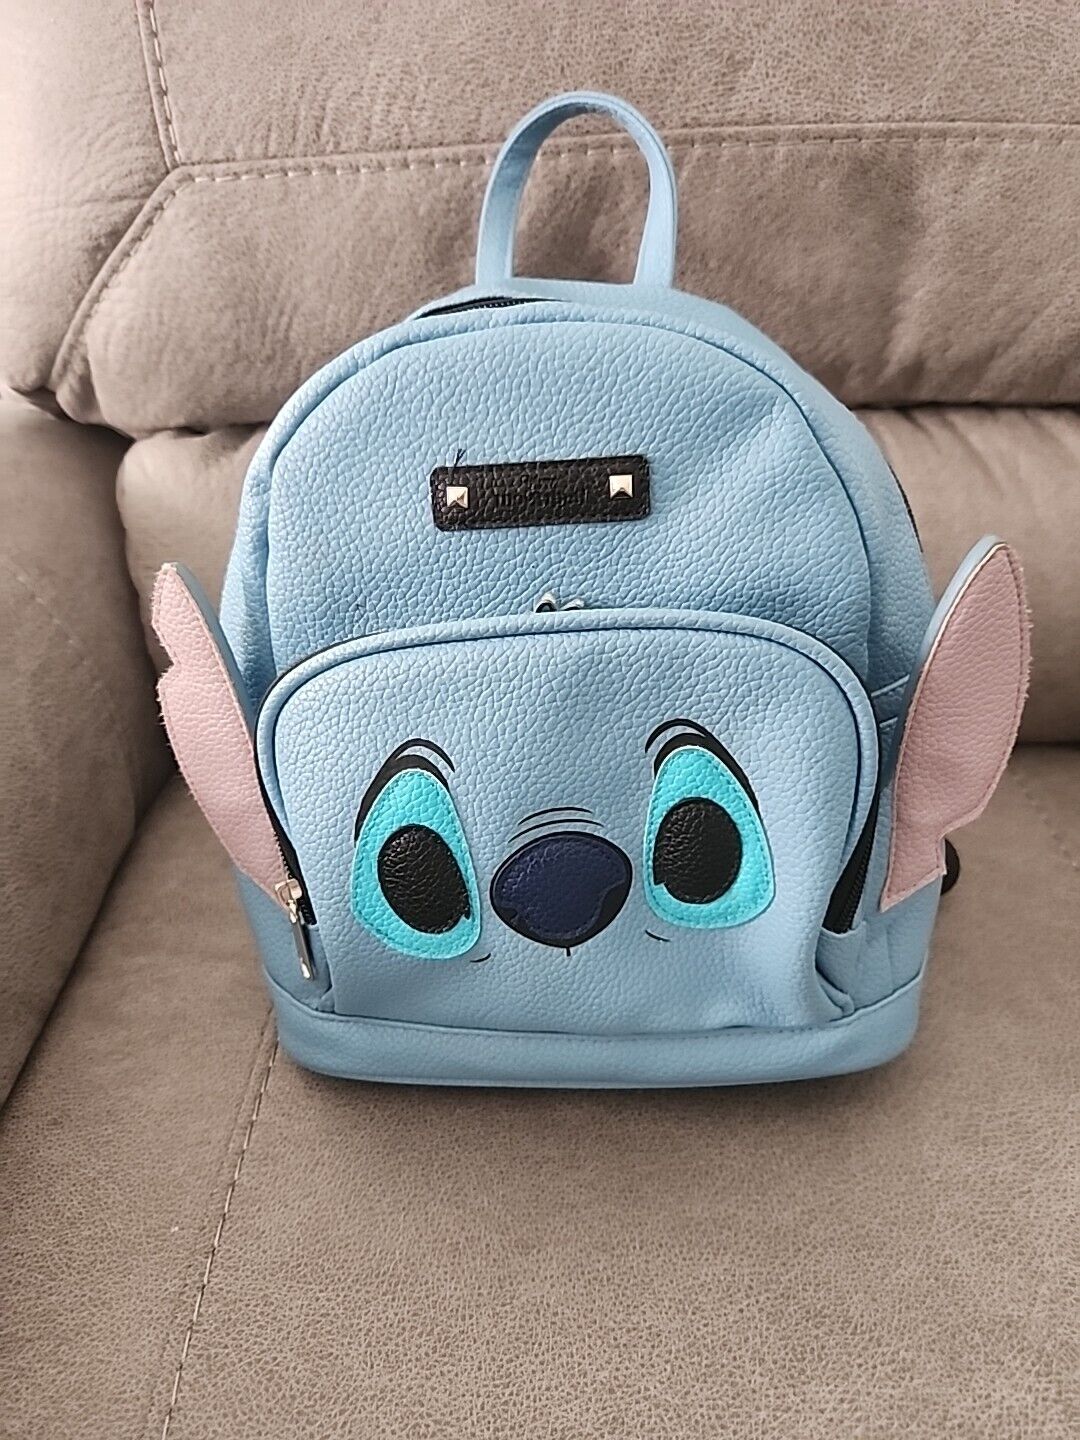 2020 Disney Lilo & Stitch Backpack Collectible Rare Cartoons